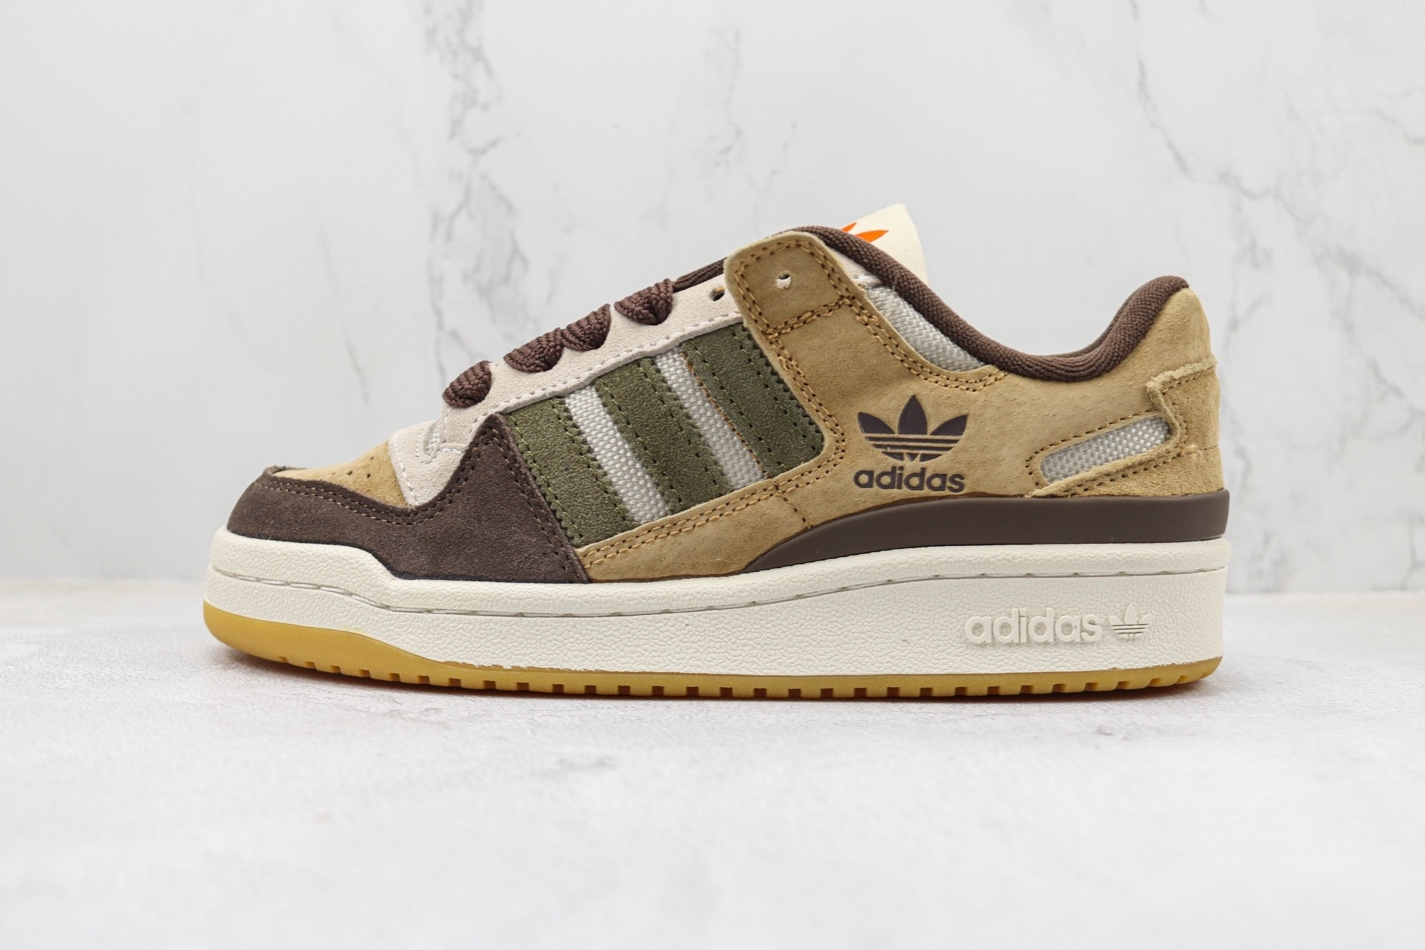 Adidas Forum Low 84 'Branch Brown' GW4334 - Stylish and Premium Sneakers